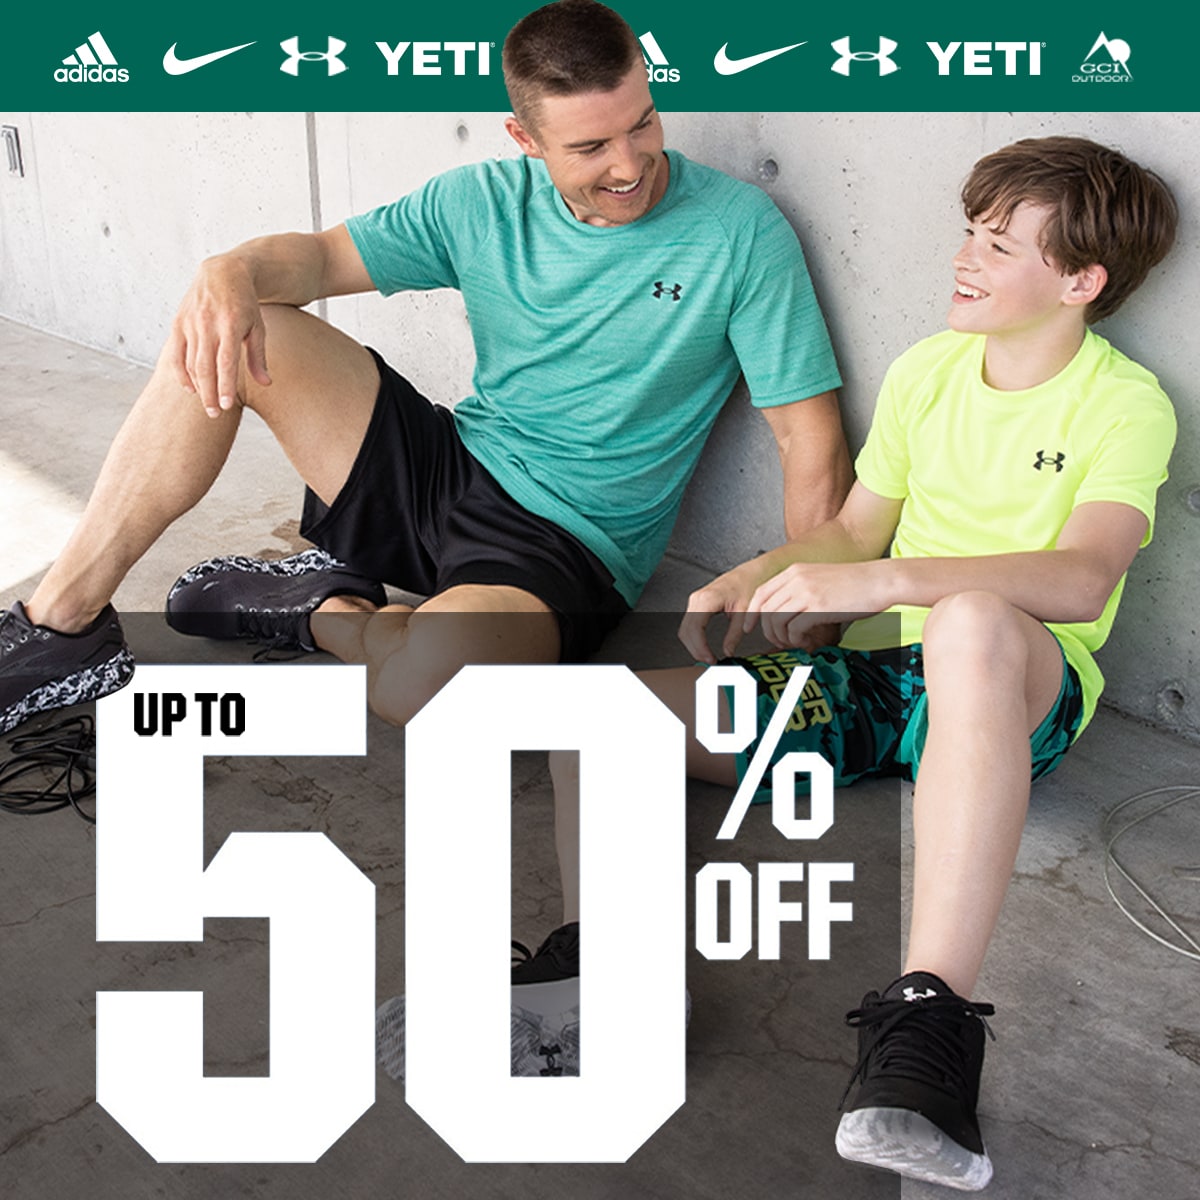 💲 You'll be glad you opened this - up to 50% off deals are yours when you  shop at DICK'S Sporting Goods! - Dick's Sporting Goods